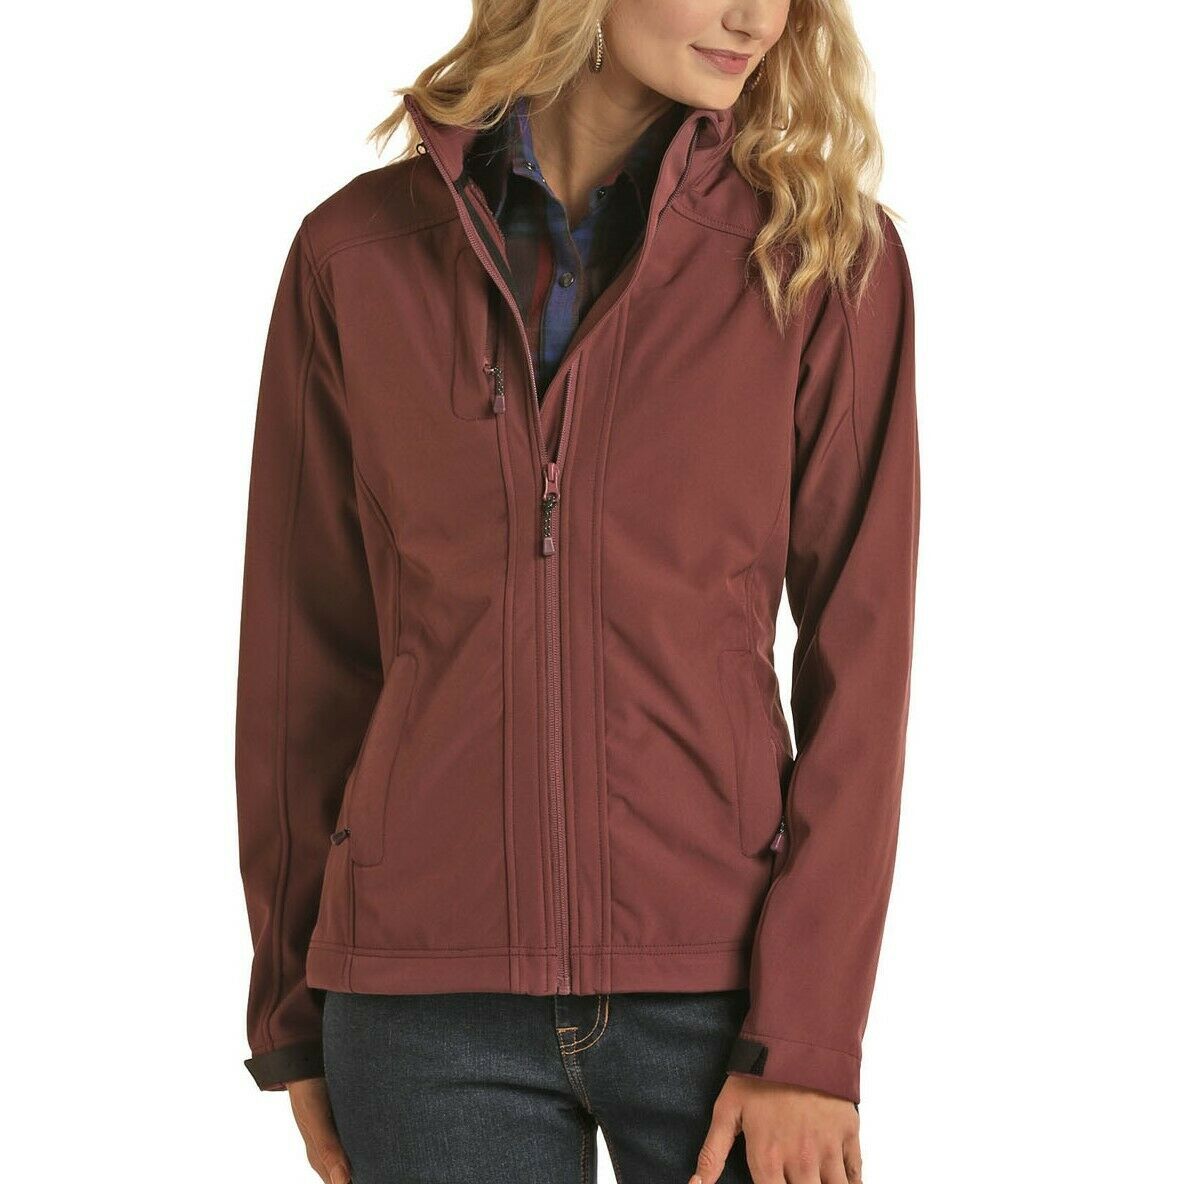 Powder River Outfitters Ladies Softshell Performance Jacket 52-9646